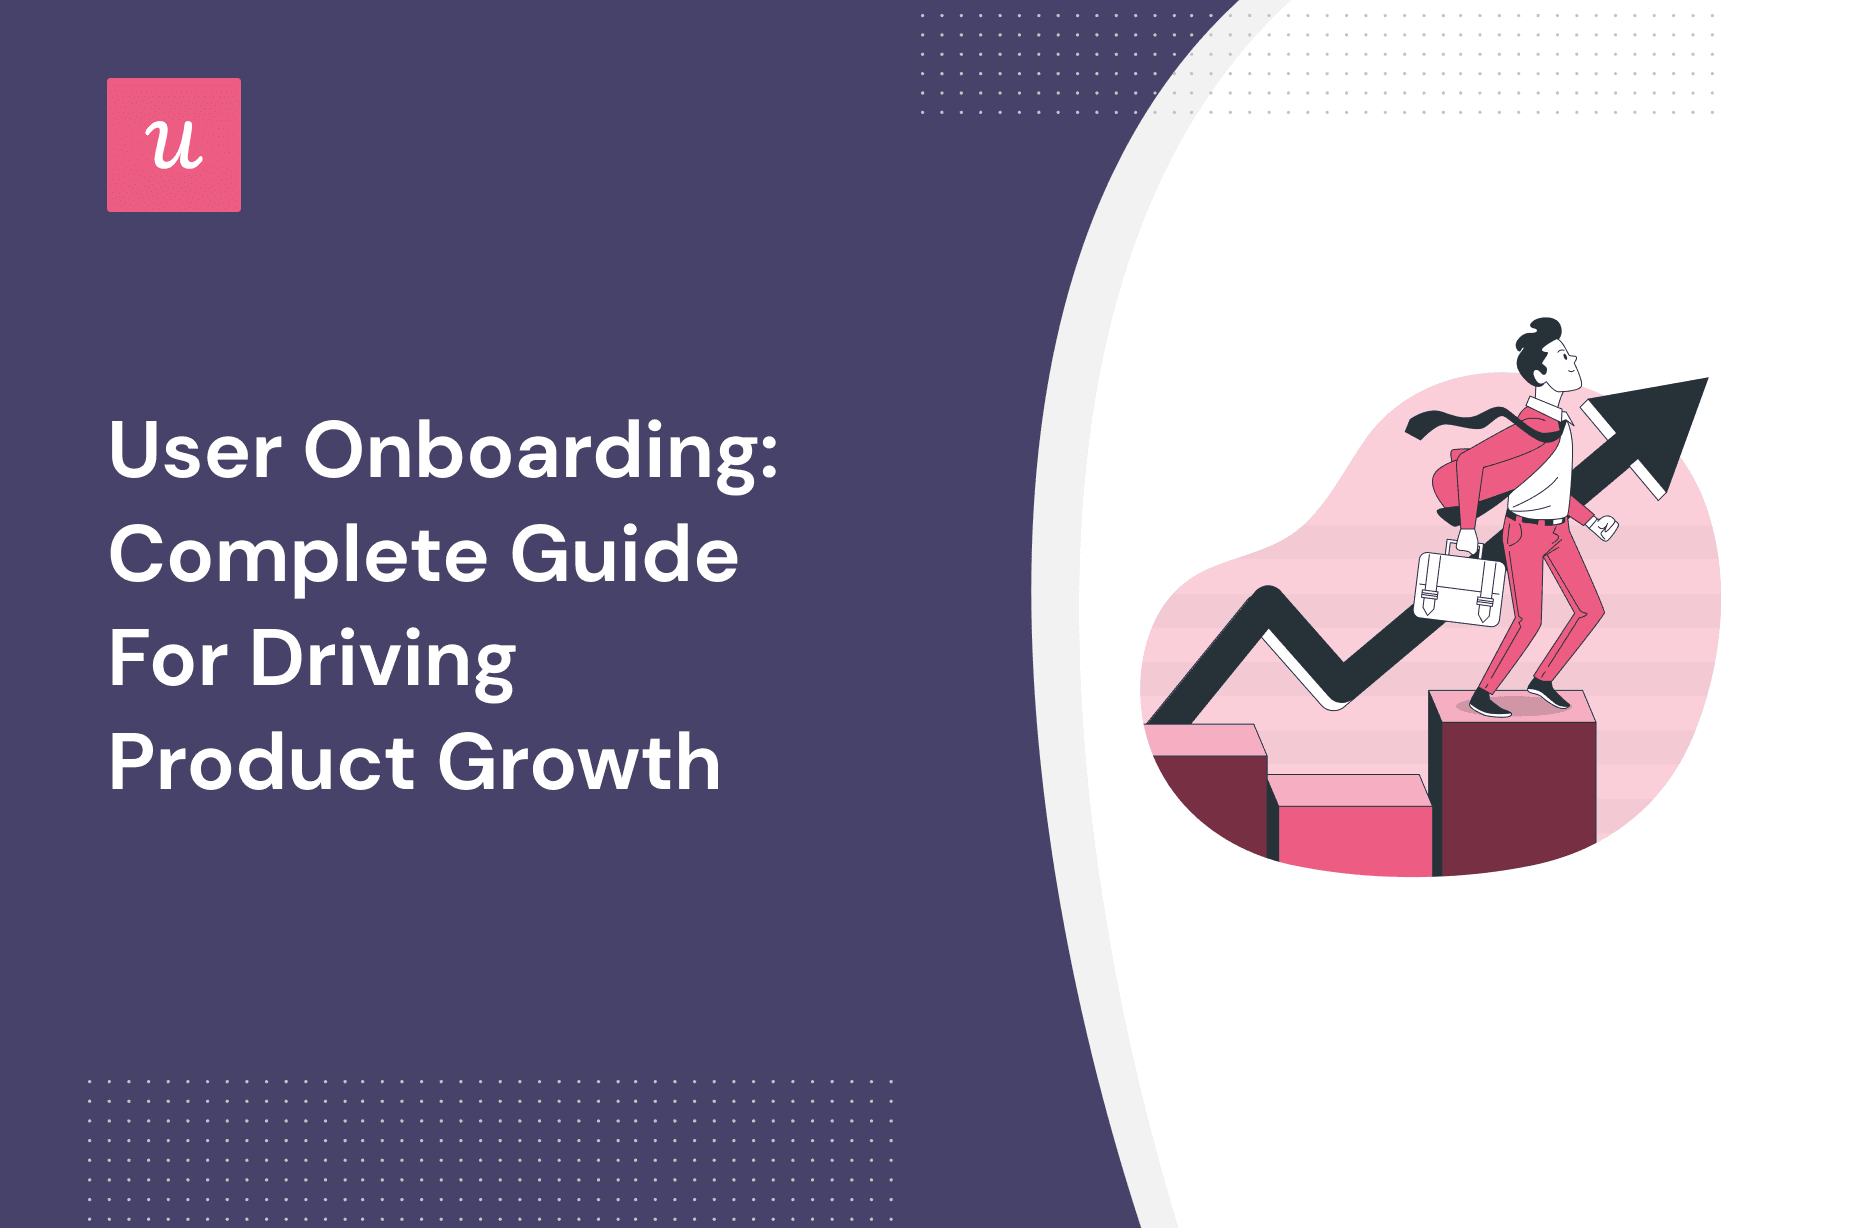 User Onboarding: Complete Guide For Driving Product Growth